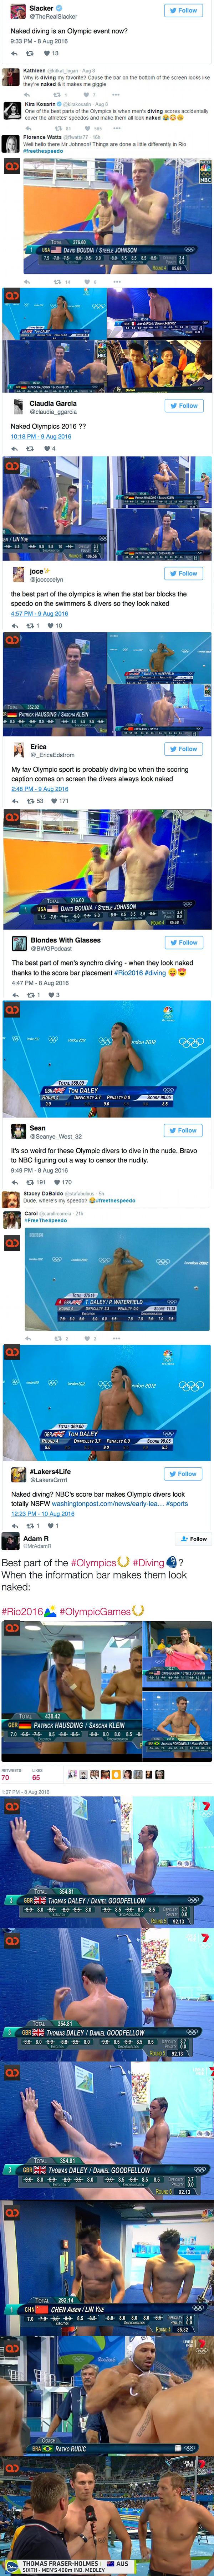 Olympic Divers From Rio 2016 Look “Almost” Naked Thanks To Timely Placed On-Screen Graphics!